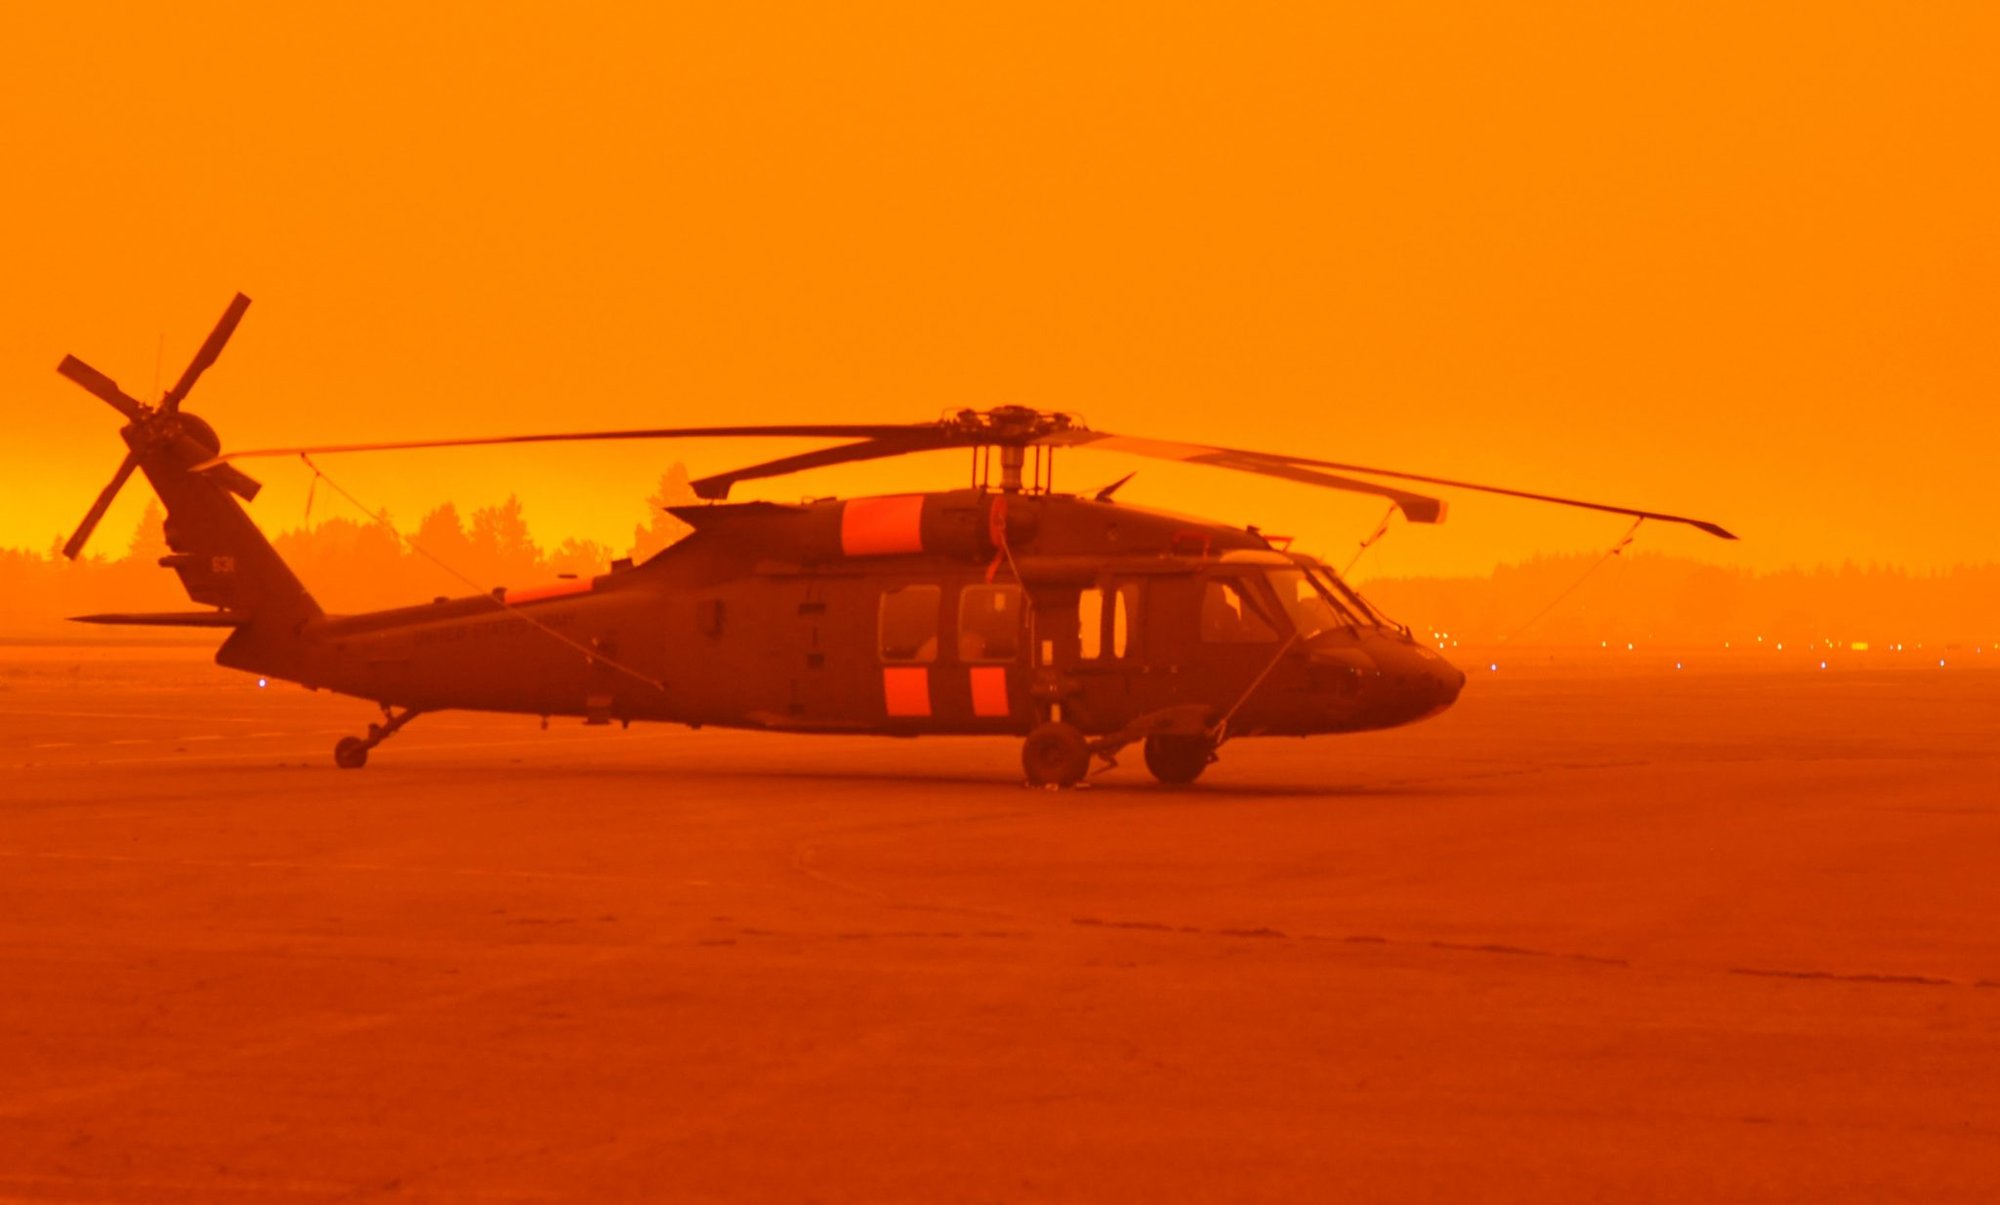 An Army National Guard UH-60M Black Hawk  helicopter waits on the tarmac in heavy smoke at the Aurora State Airport, near Aurora, Ore. on September 9, 2020. Flight crews from the Oregon Army National Guard’s Gulf Company, 1st Battalion, 189th Aviation Regiment based out of Salem, Ore. were called in to support state and local officials as unprecedented fire conditions forced evacuations across the state. Guard helicopters have dropped more than 22,000 gallons of water on Oregon’s wildland fires since mid-August. (National Guard photo by Maj. Leslie Reed, Oregon Military Department Public Affairs).